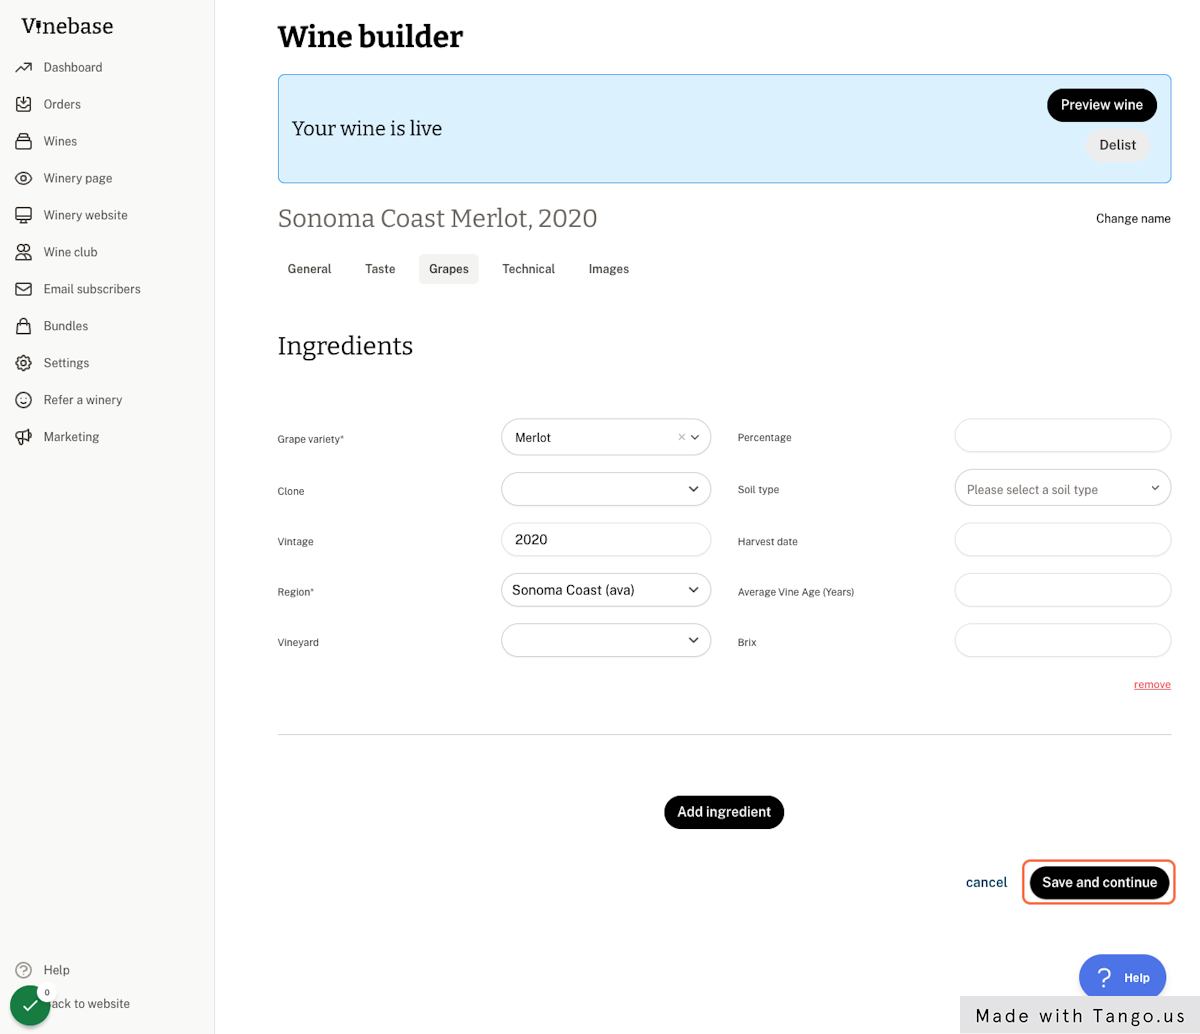 Fill out required fields* in the "grapes" section - click save and continue